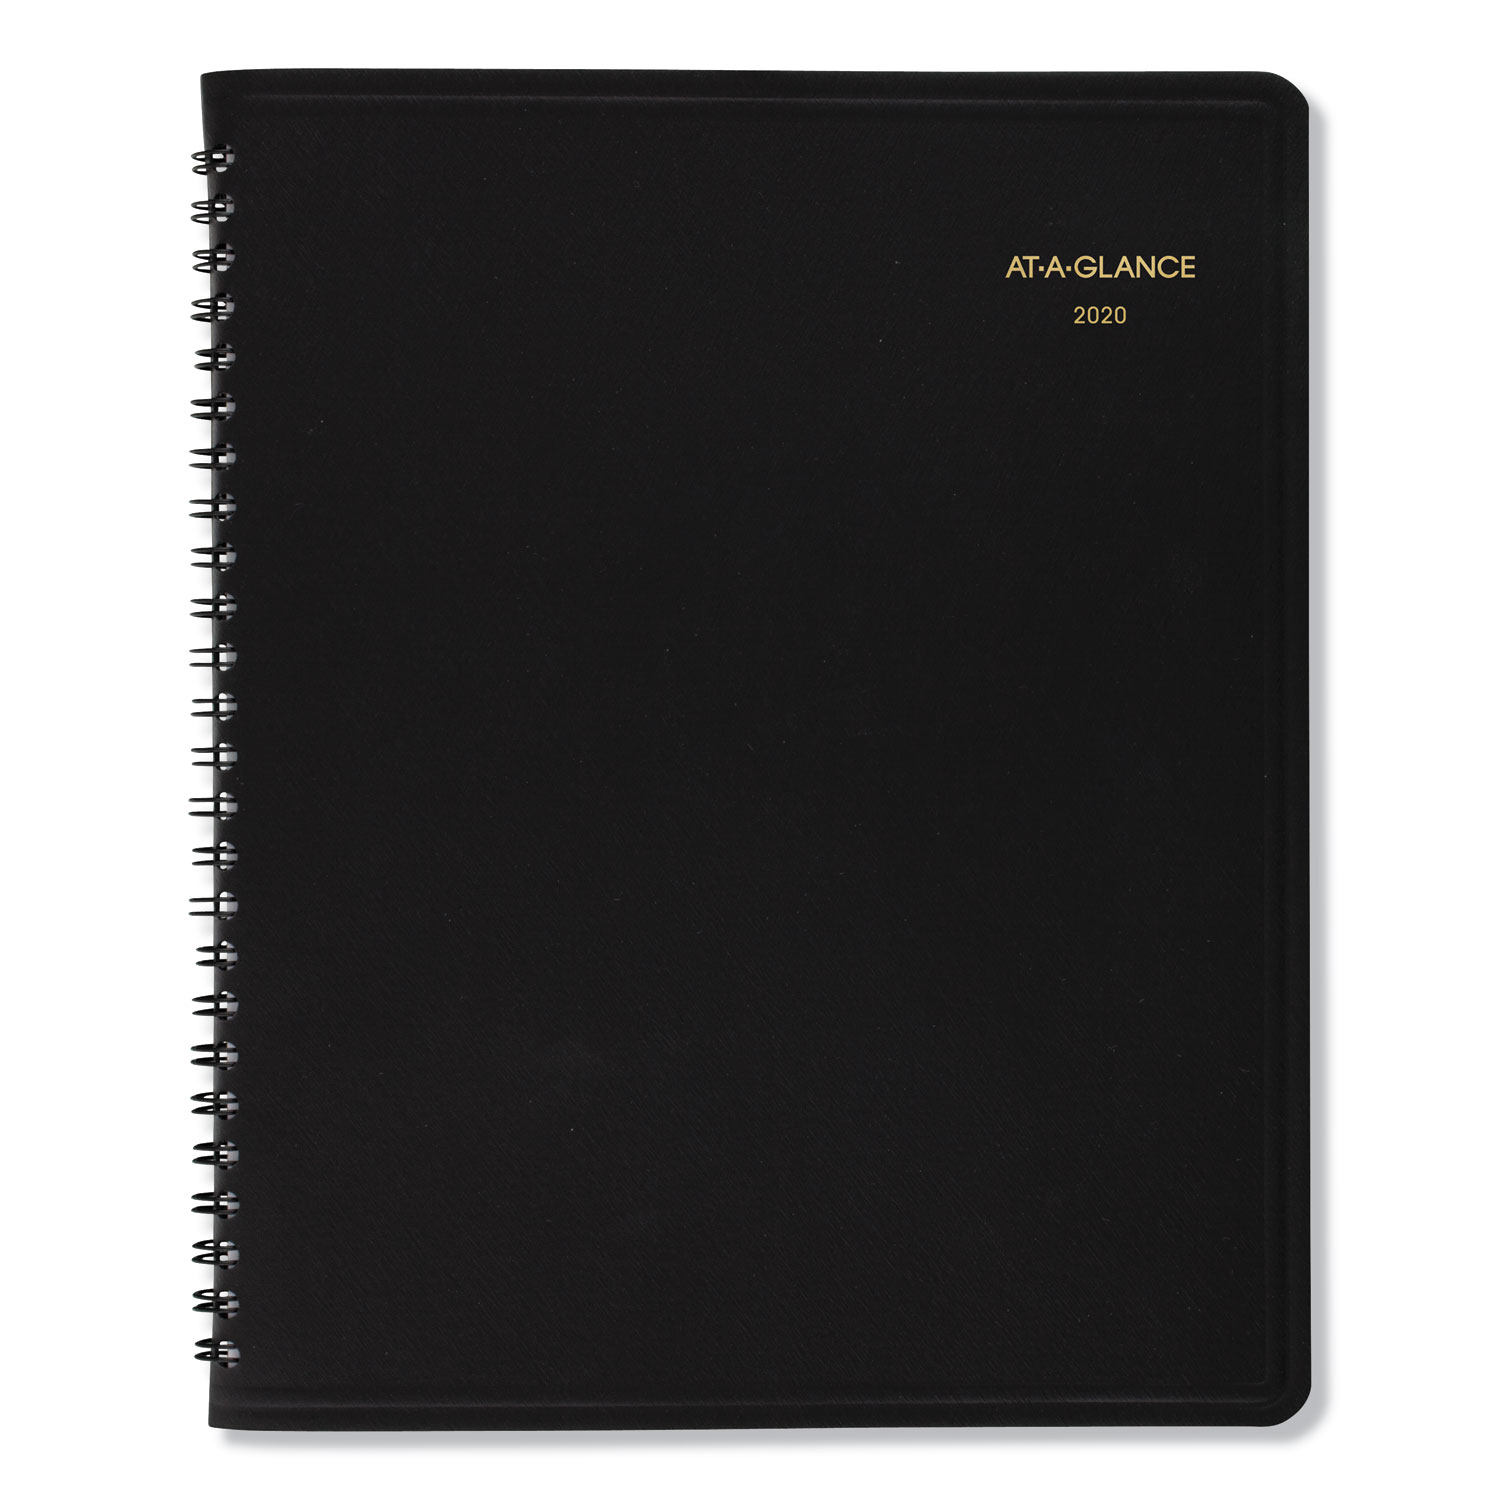 AT-A-GLANCE® 24-Hour Daily Appointment Book.